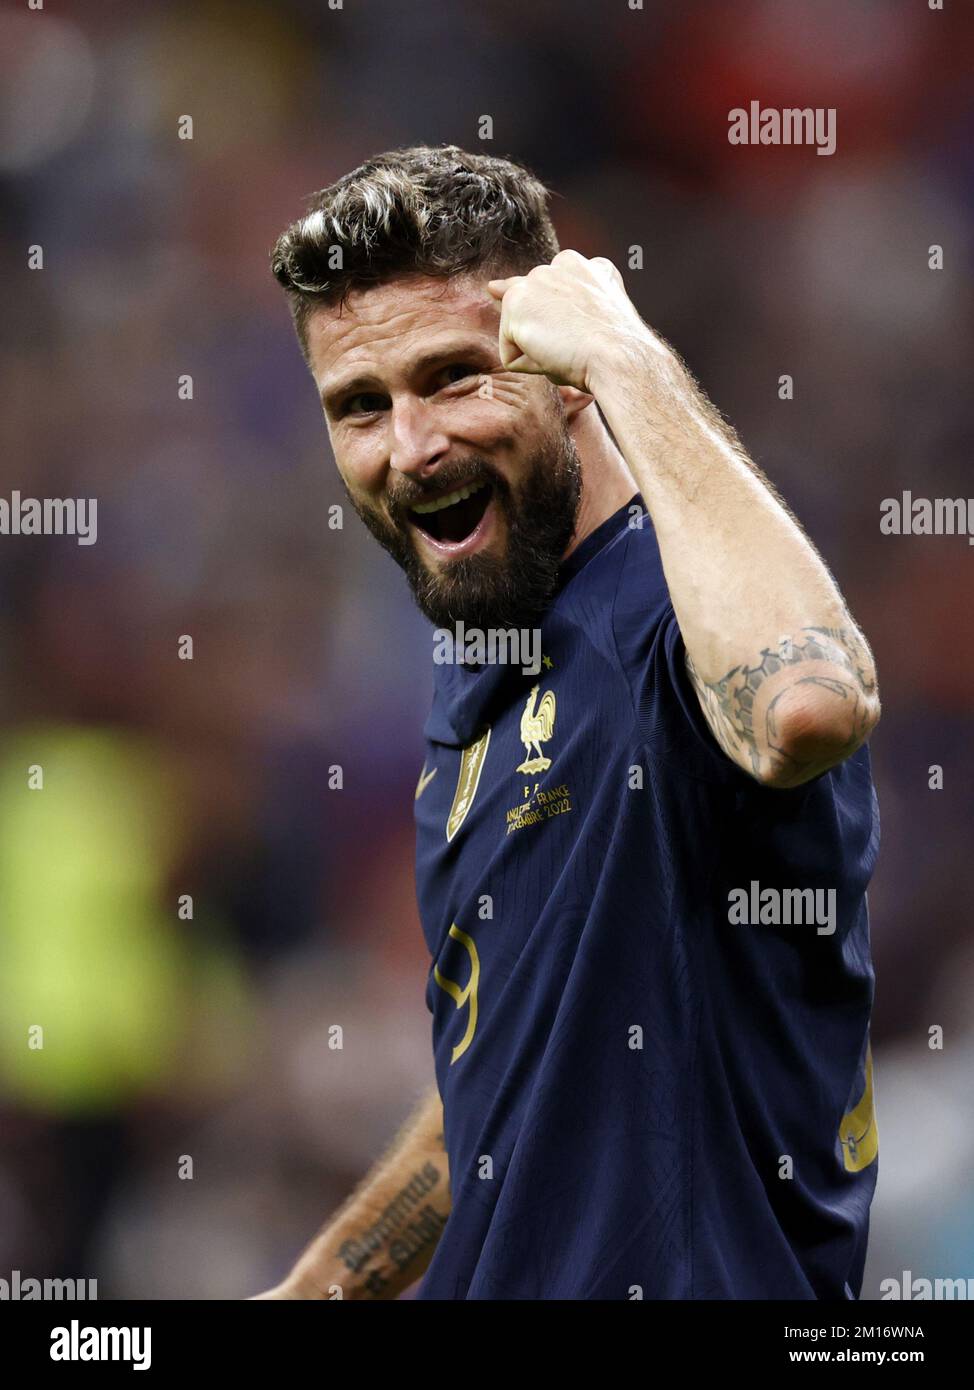 AL KHOR - Olivier Giroud of France celebrate the 1-2 draw during the FIFA World Cup Qatar 2022 quarter final match between England and France at Al Bayt Stadium on December 10, 2022 in Al Khor, Qatar. AP | Dutch Height | MAURICE OF STONE Credit: ANP/Alamy Live News Stock Photo